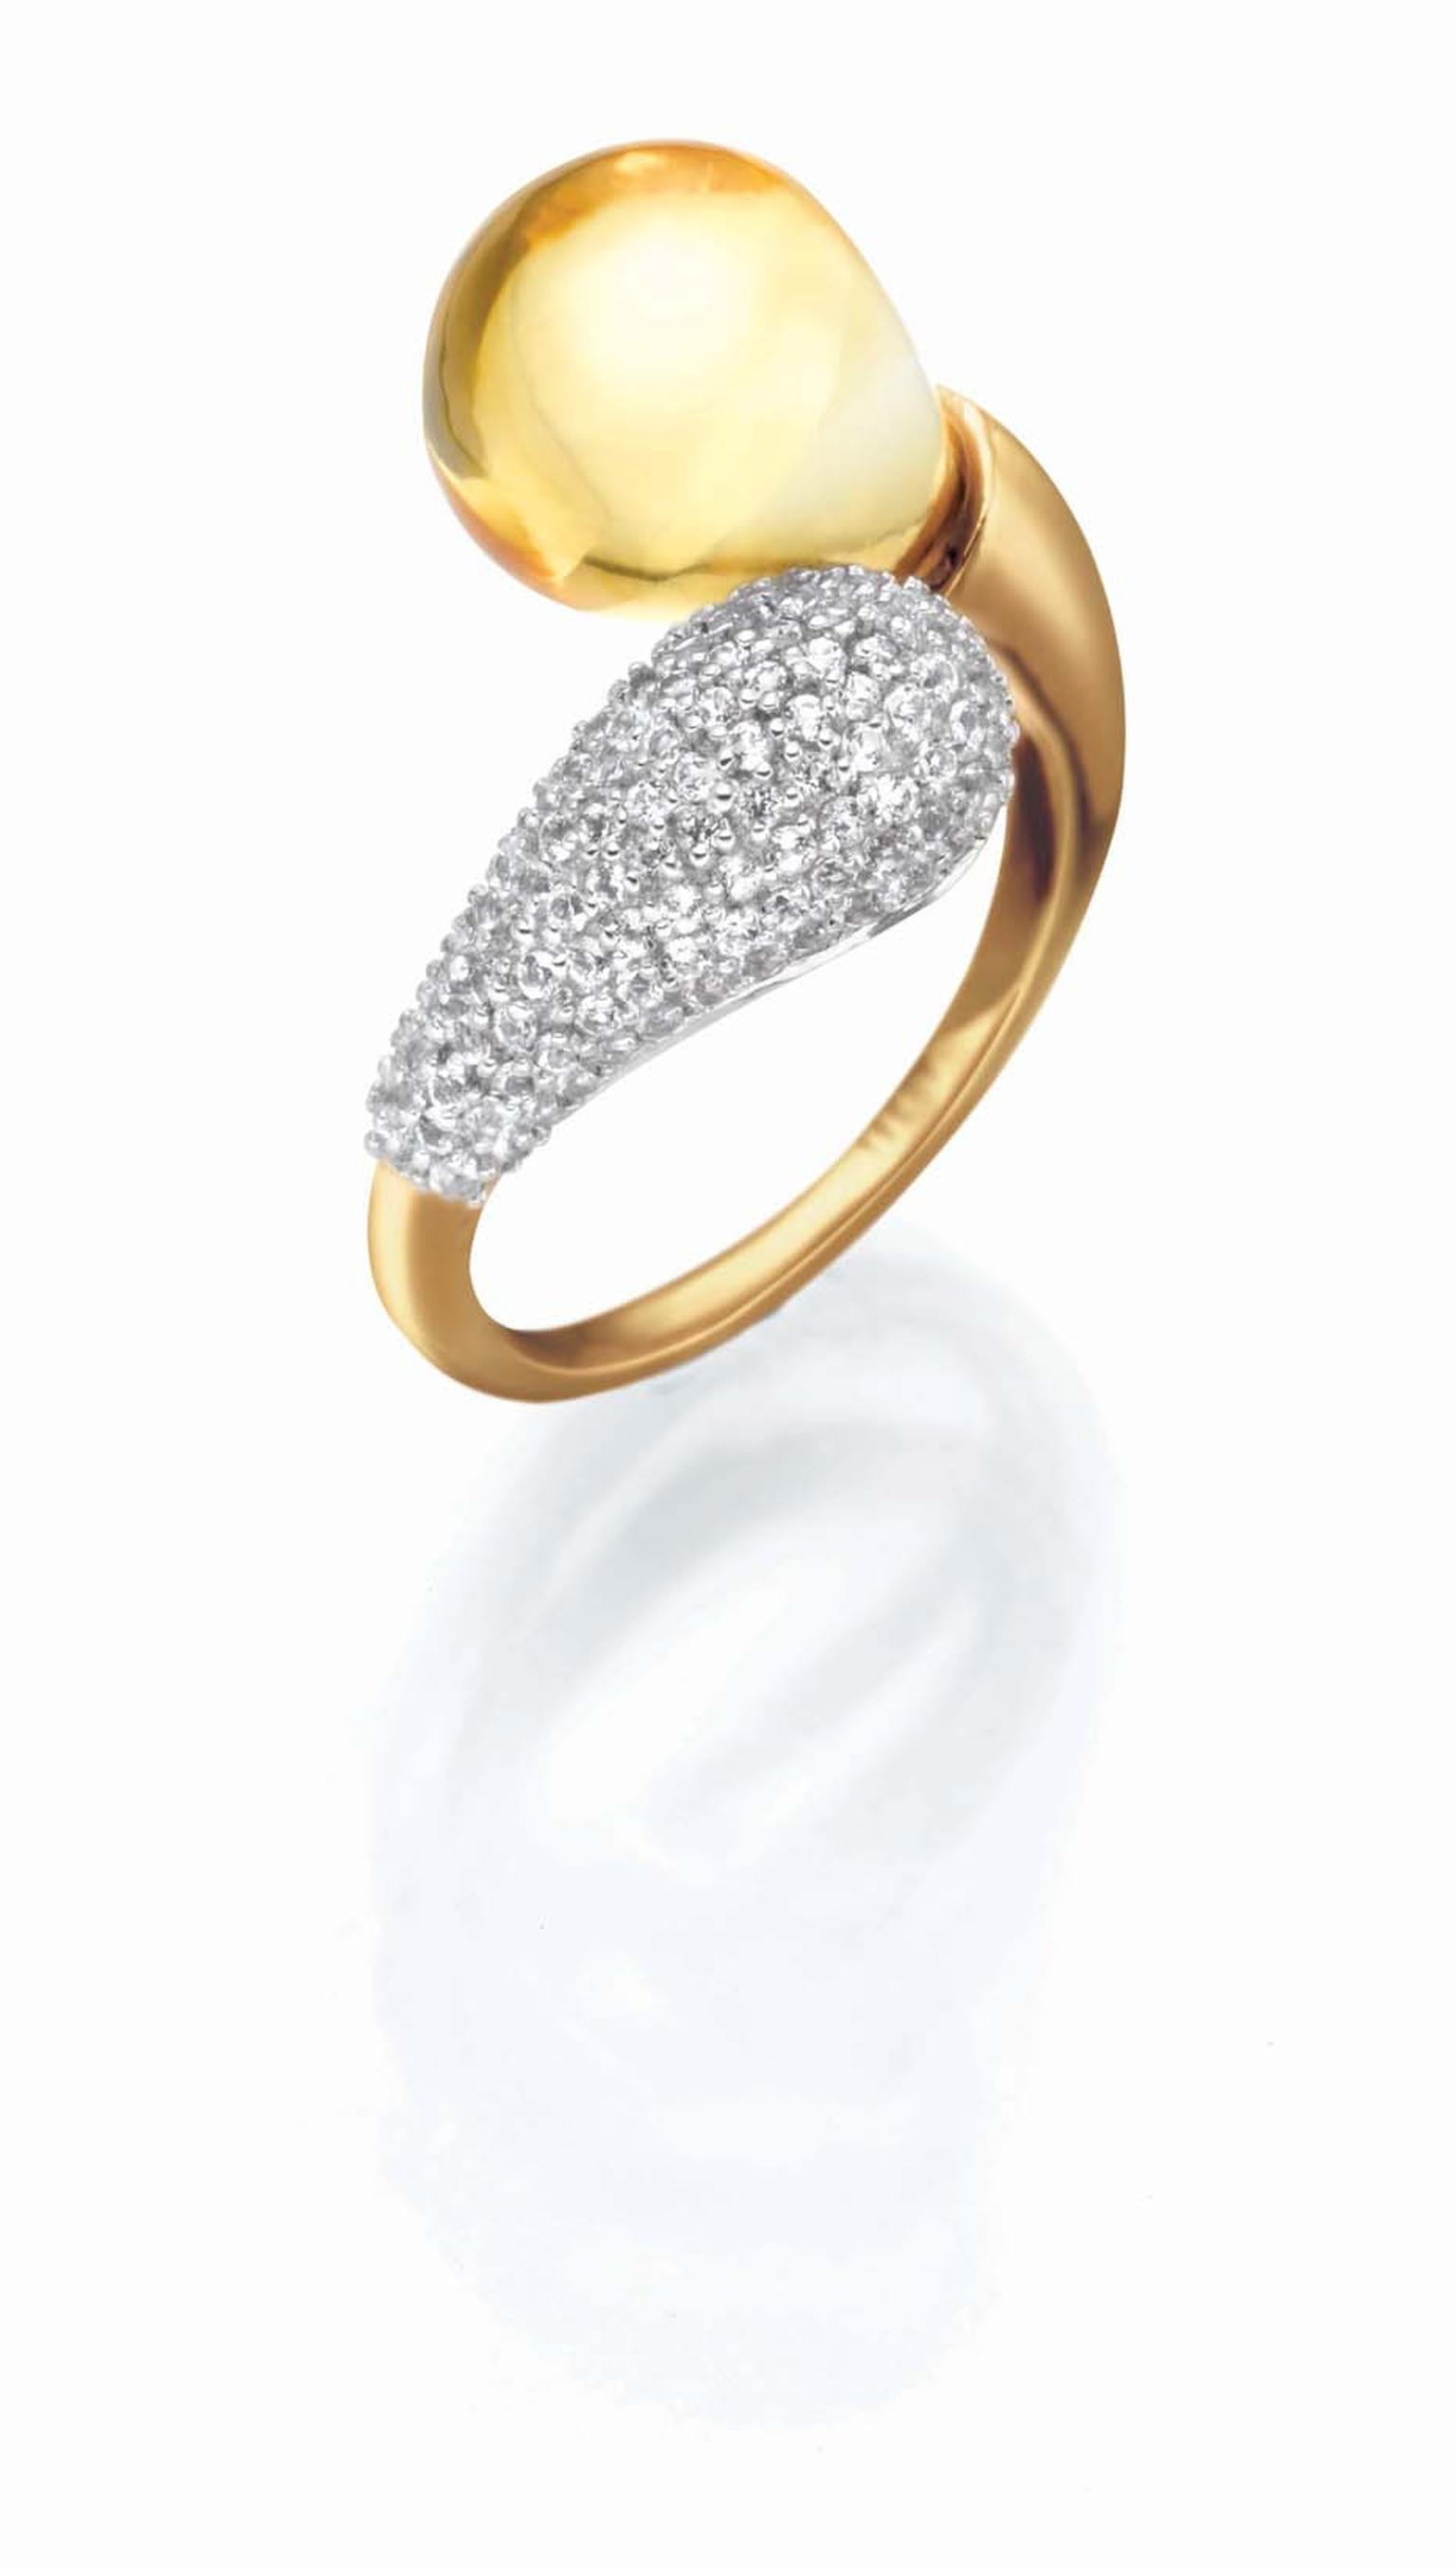 Tanishq IVA 2 collection gold ring with 